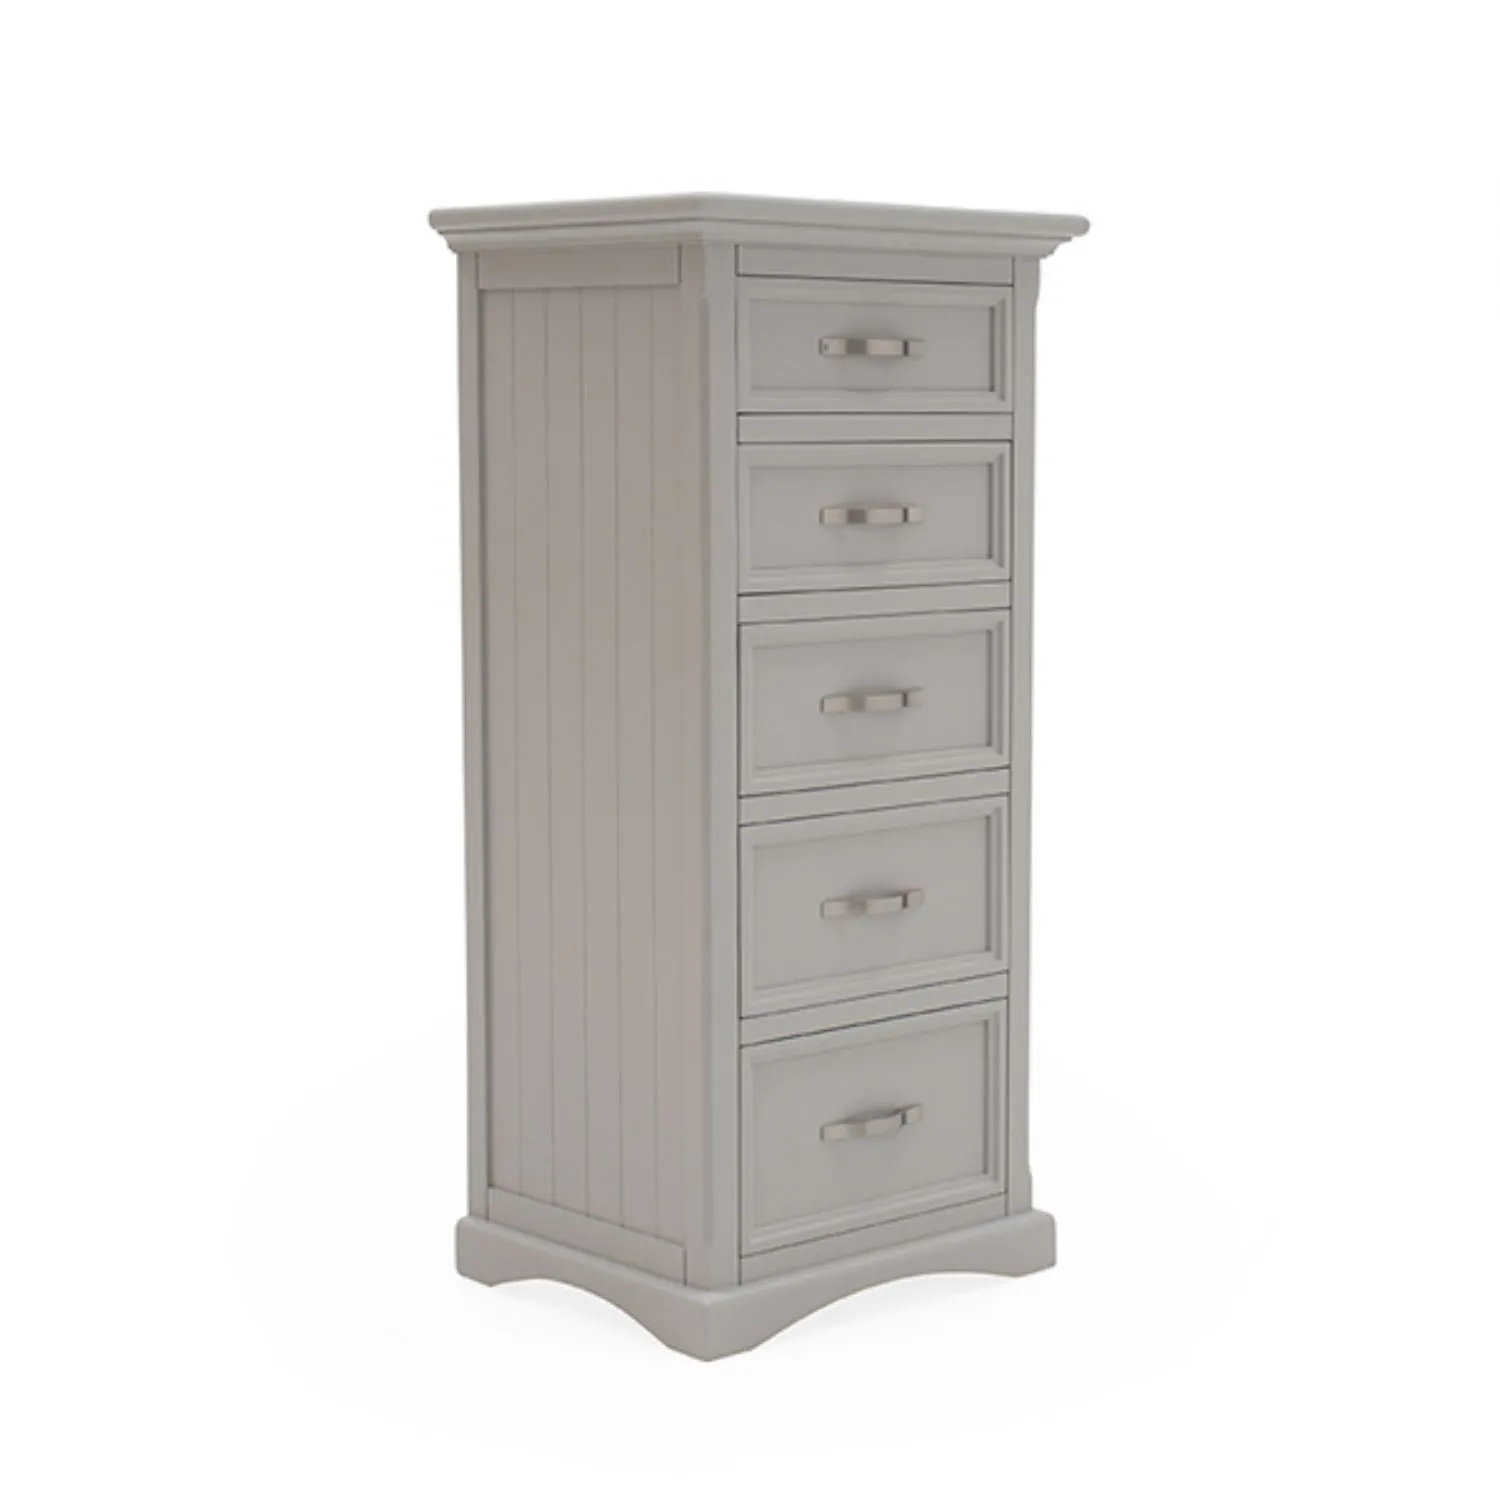 Grey Painted Tallboy Chest of 5 Drawers